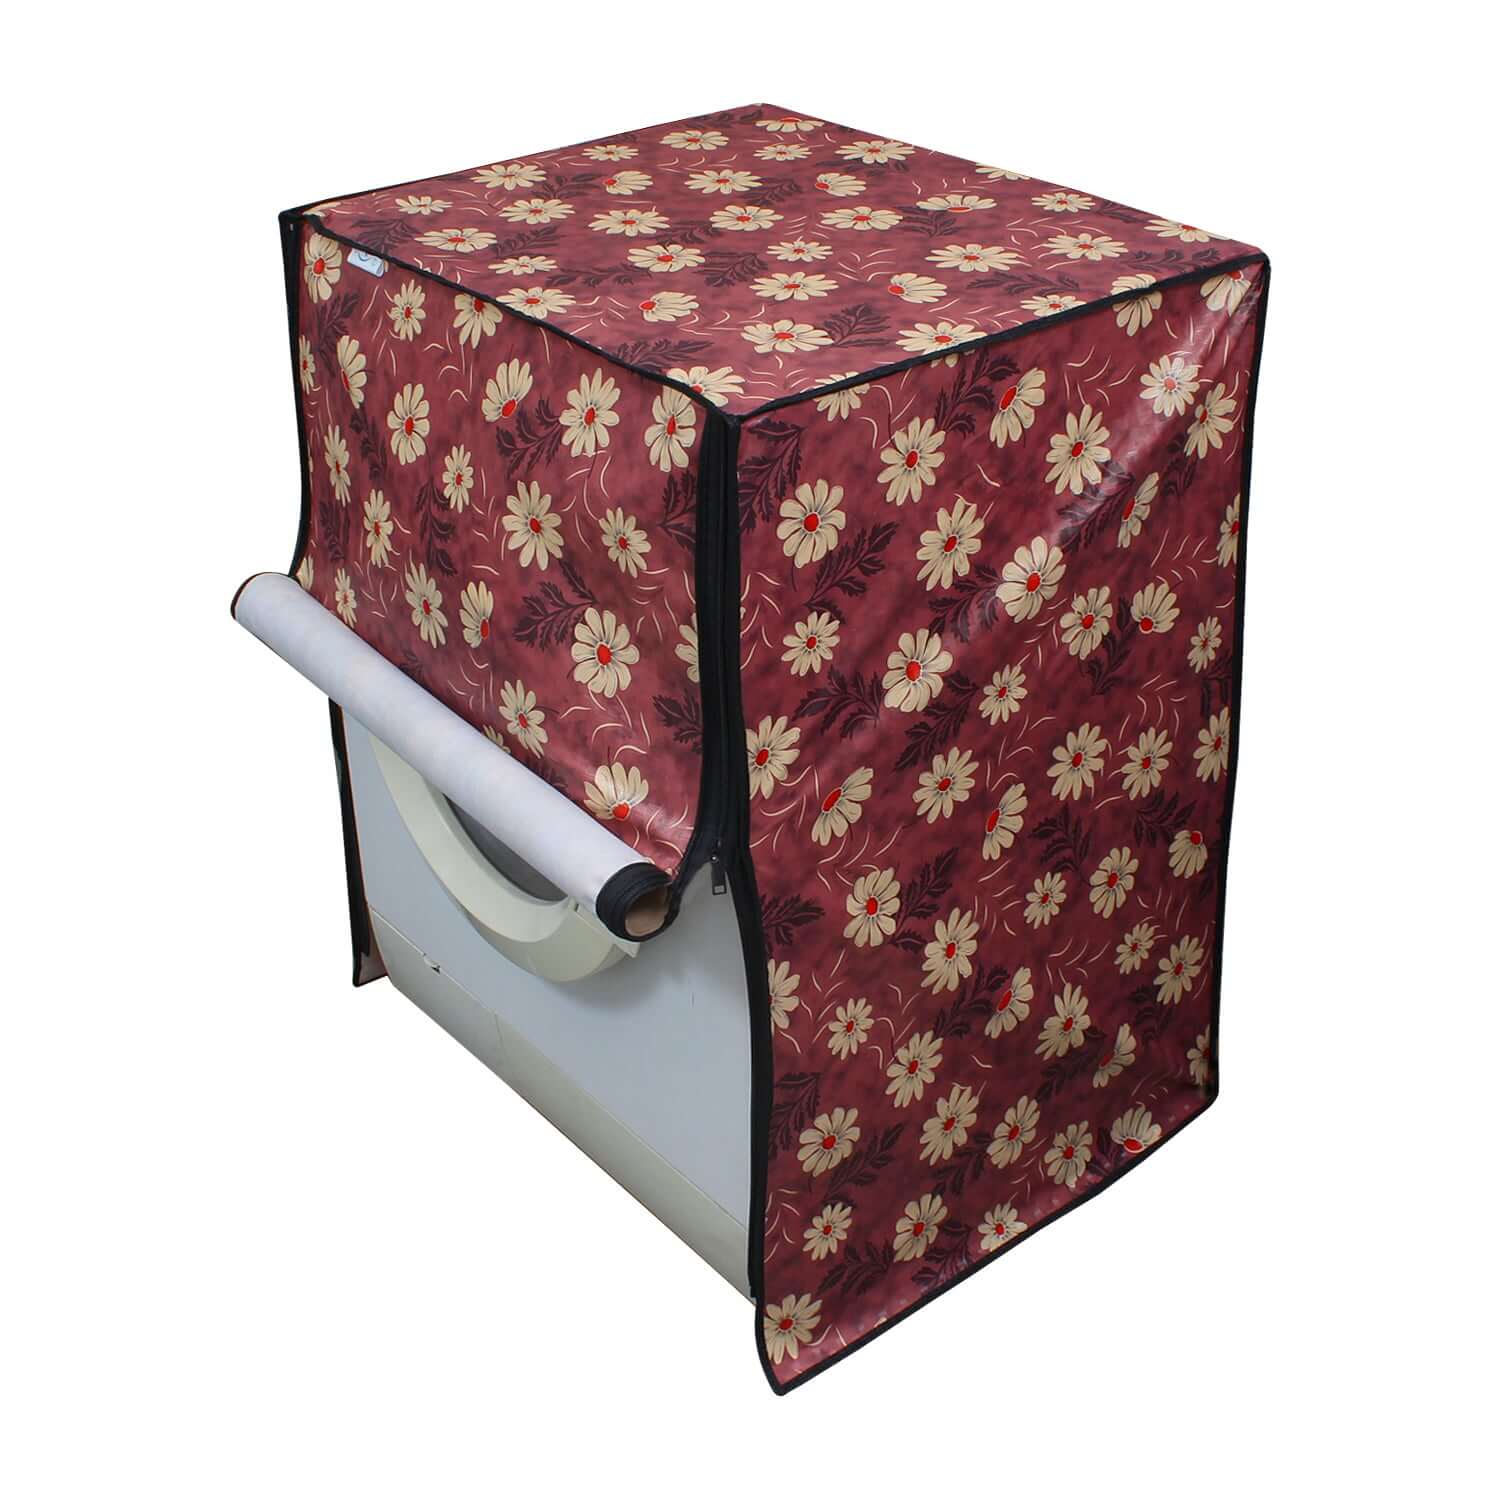 Fully Automatic Front Load Washing Machine Cover, SA18 - Dream Care Furnishings Private Limited